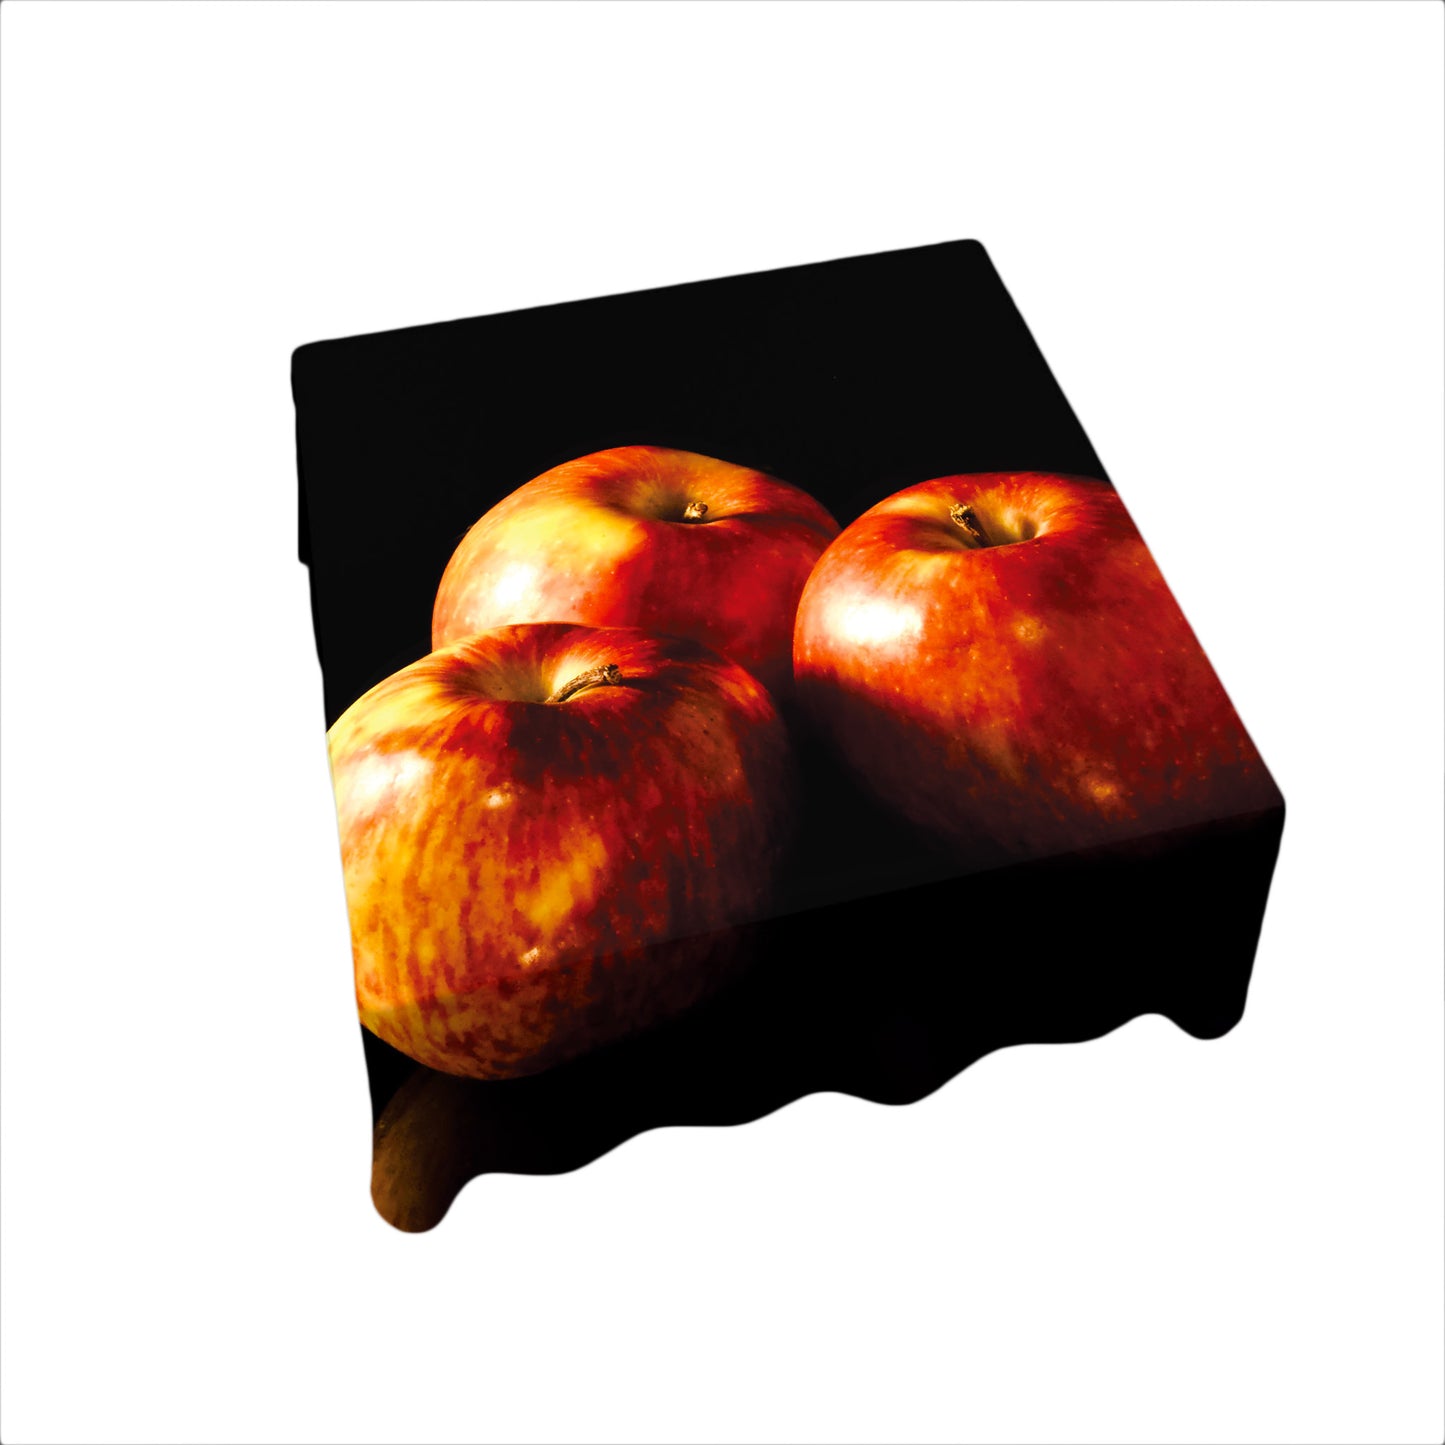 Apples on Black Square Tablecloth